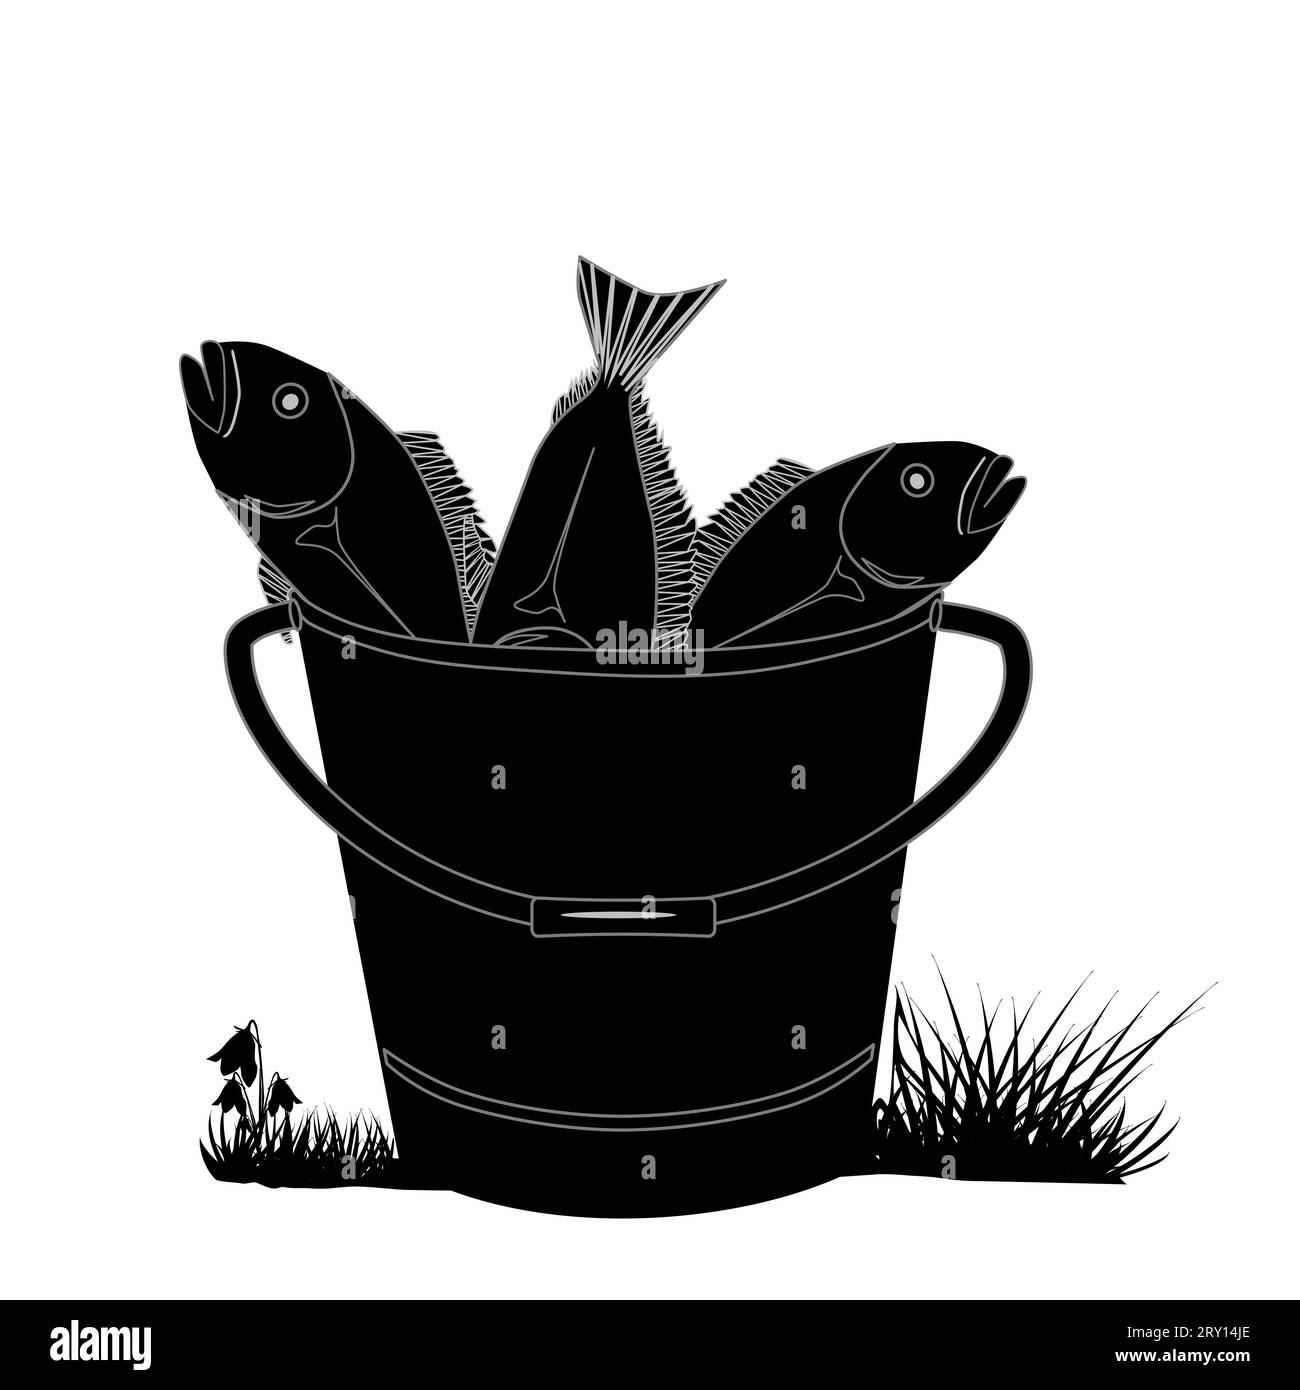 Bucket with fish Black and White Stock Photos & Images - Alamy